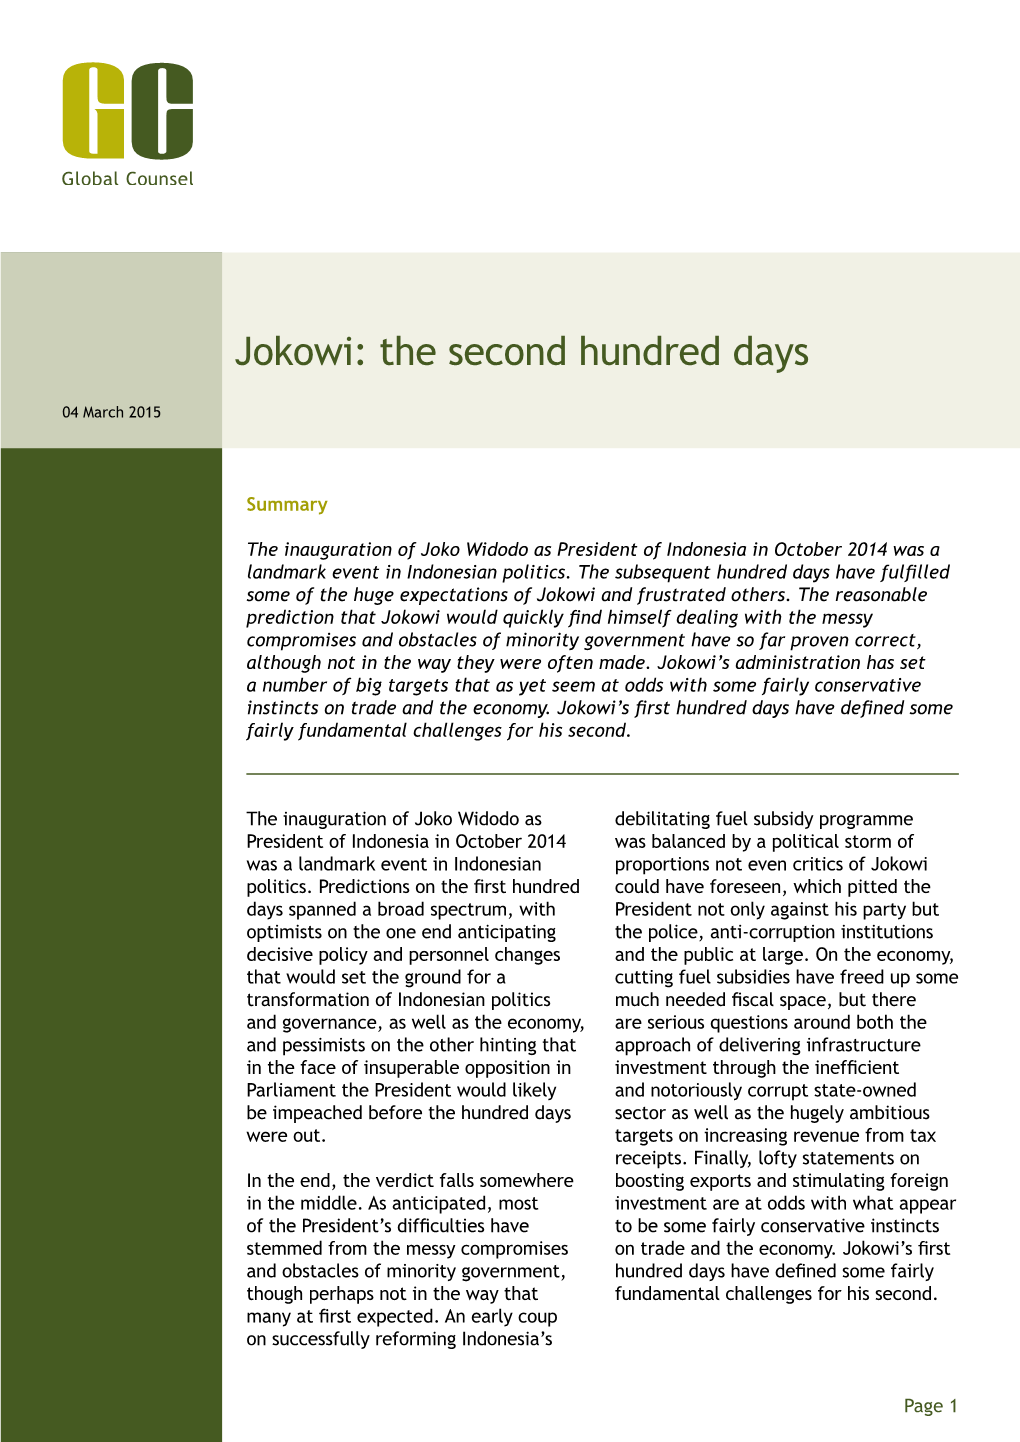 Jokowi: the Second Hundred Days